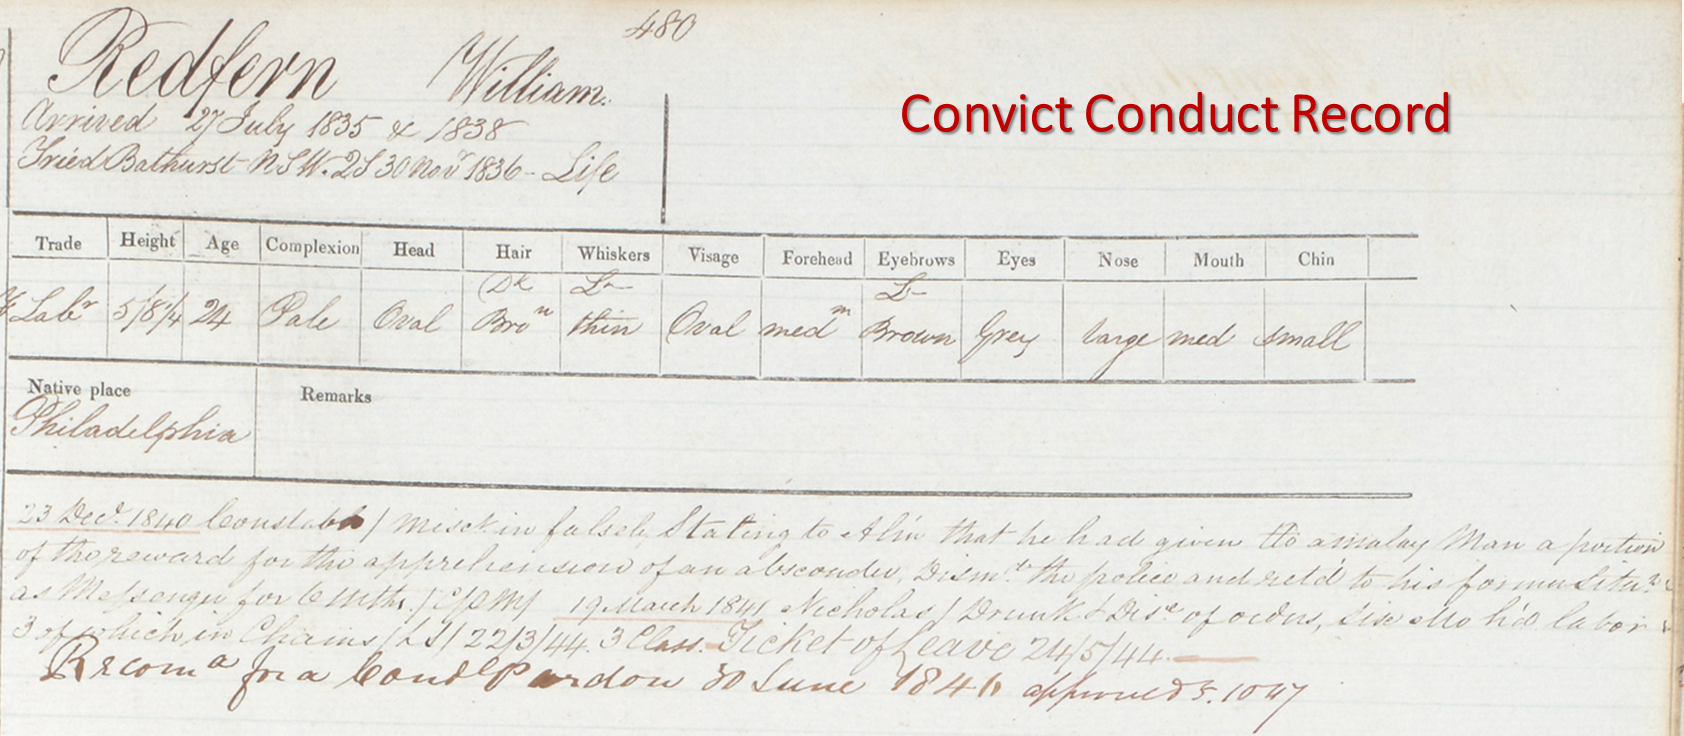 Convict Conduct Record of William Redfern showing biographical details and incidents during his time as a convict.